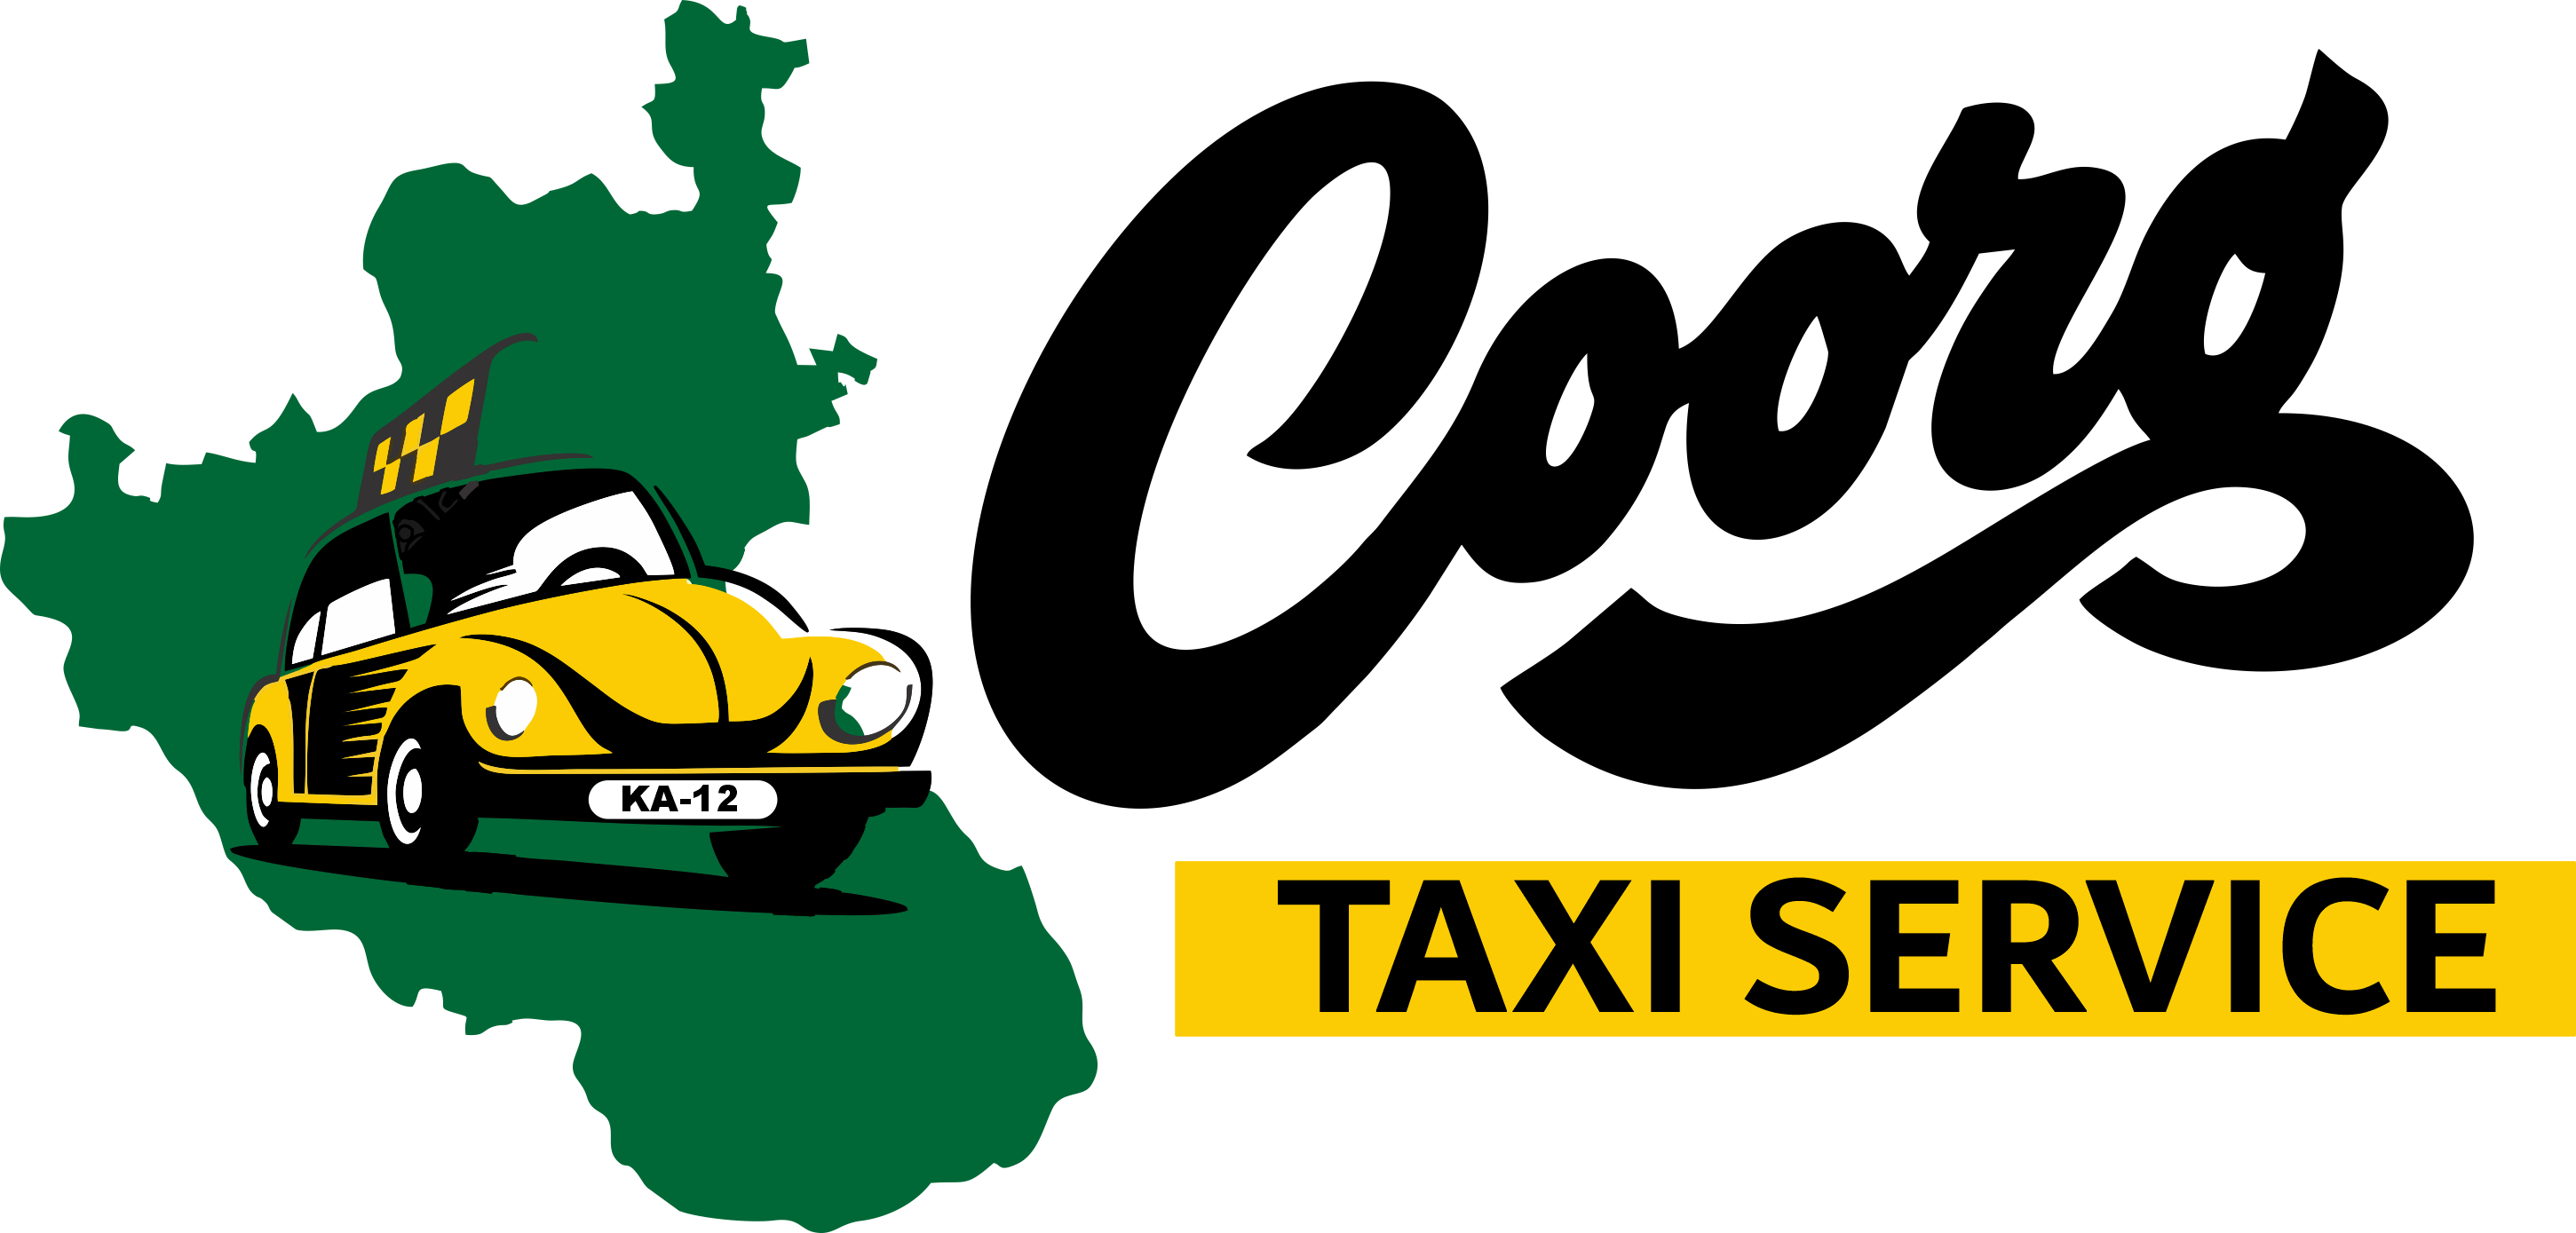 Coorg taxi service